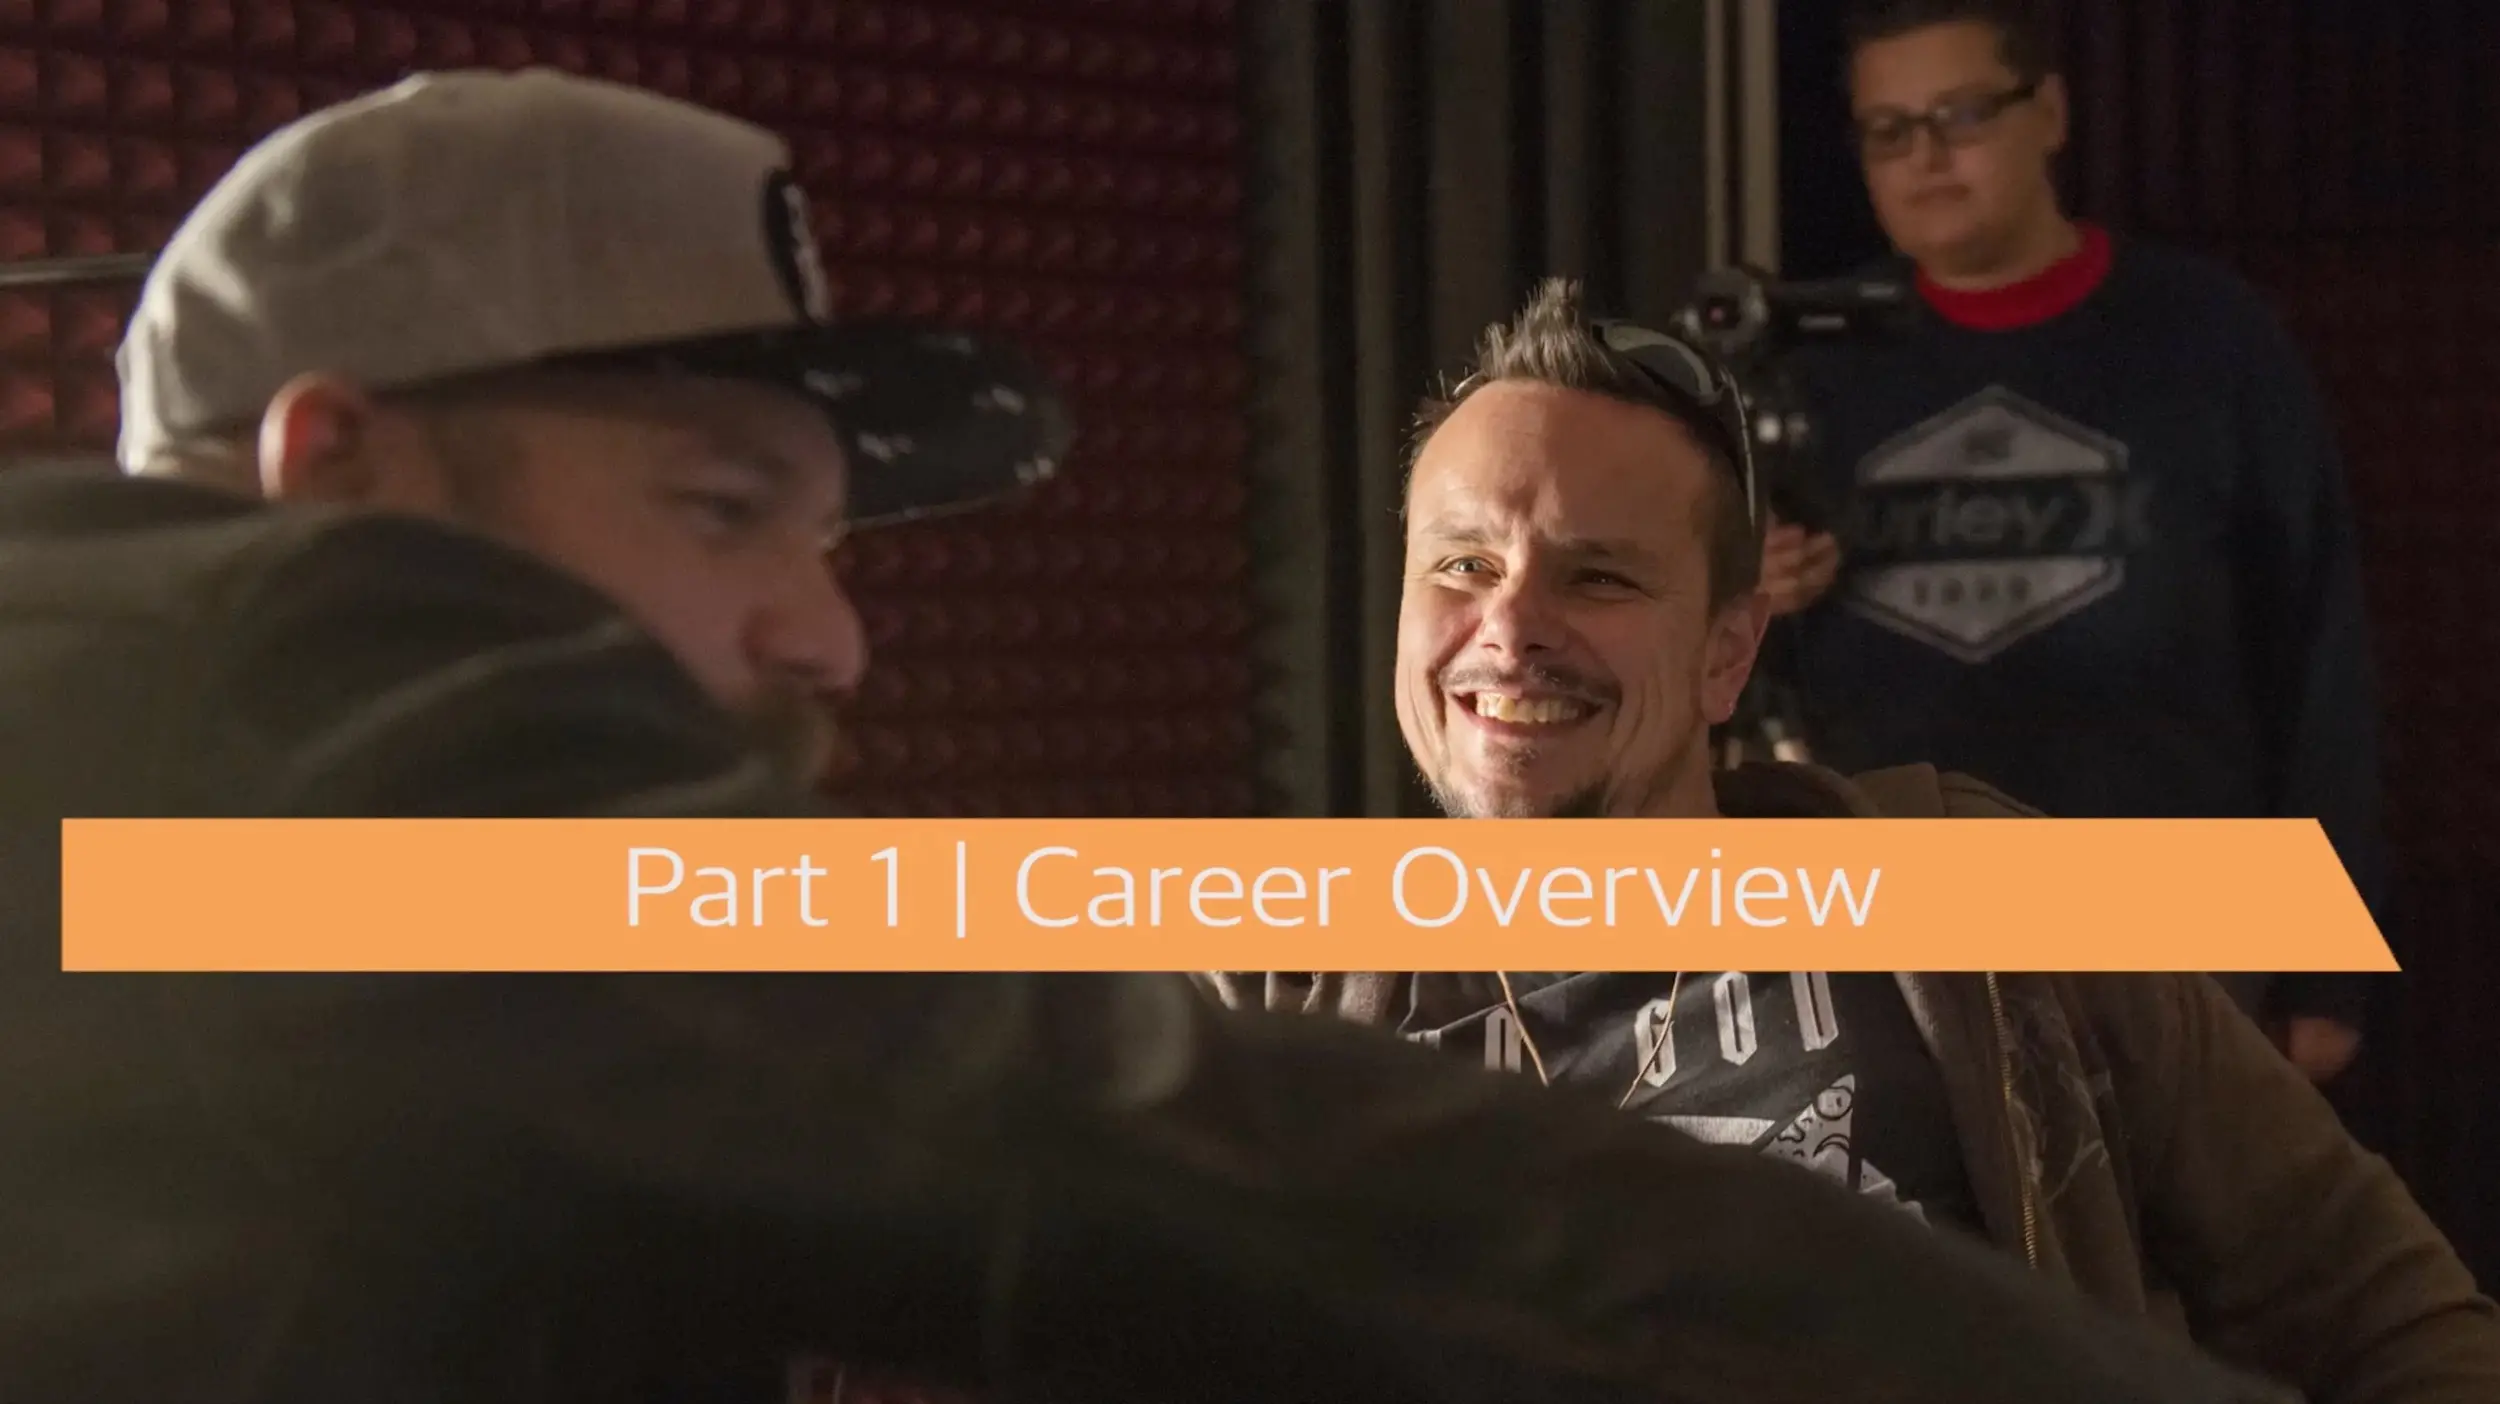 Part 1 career overview for music producer program.